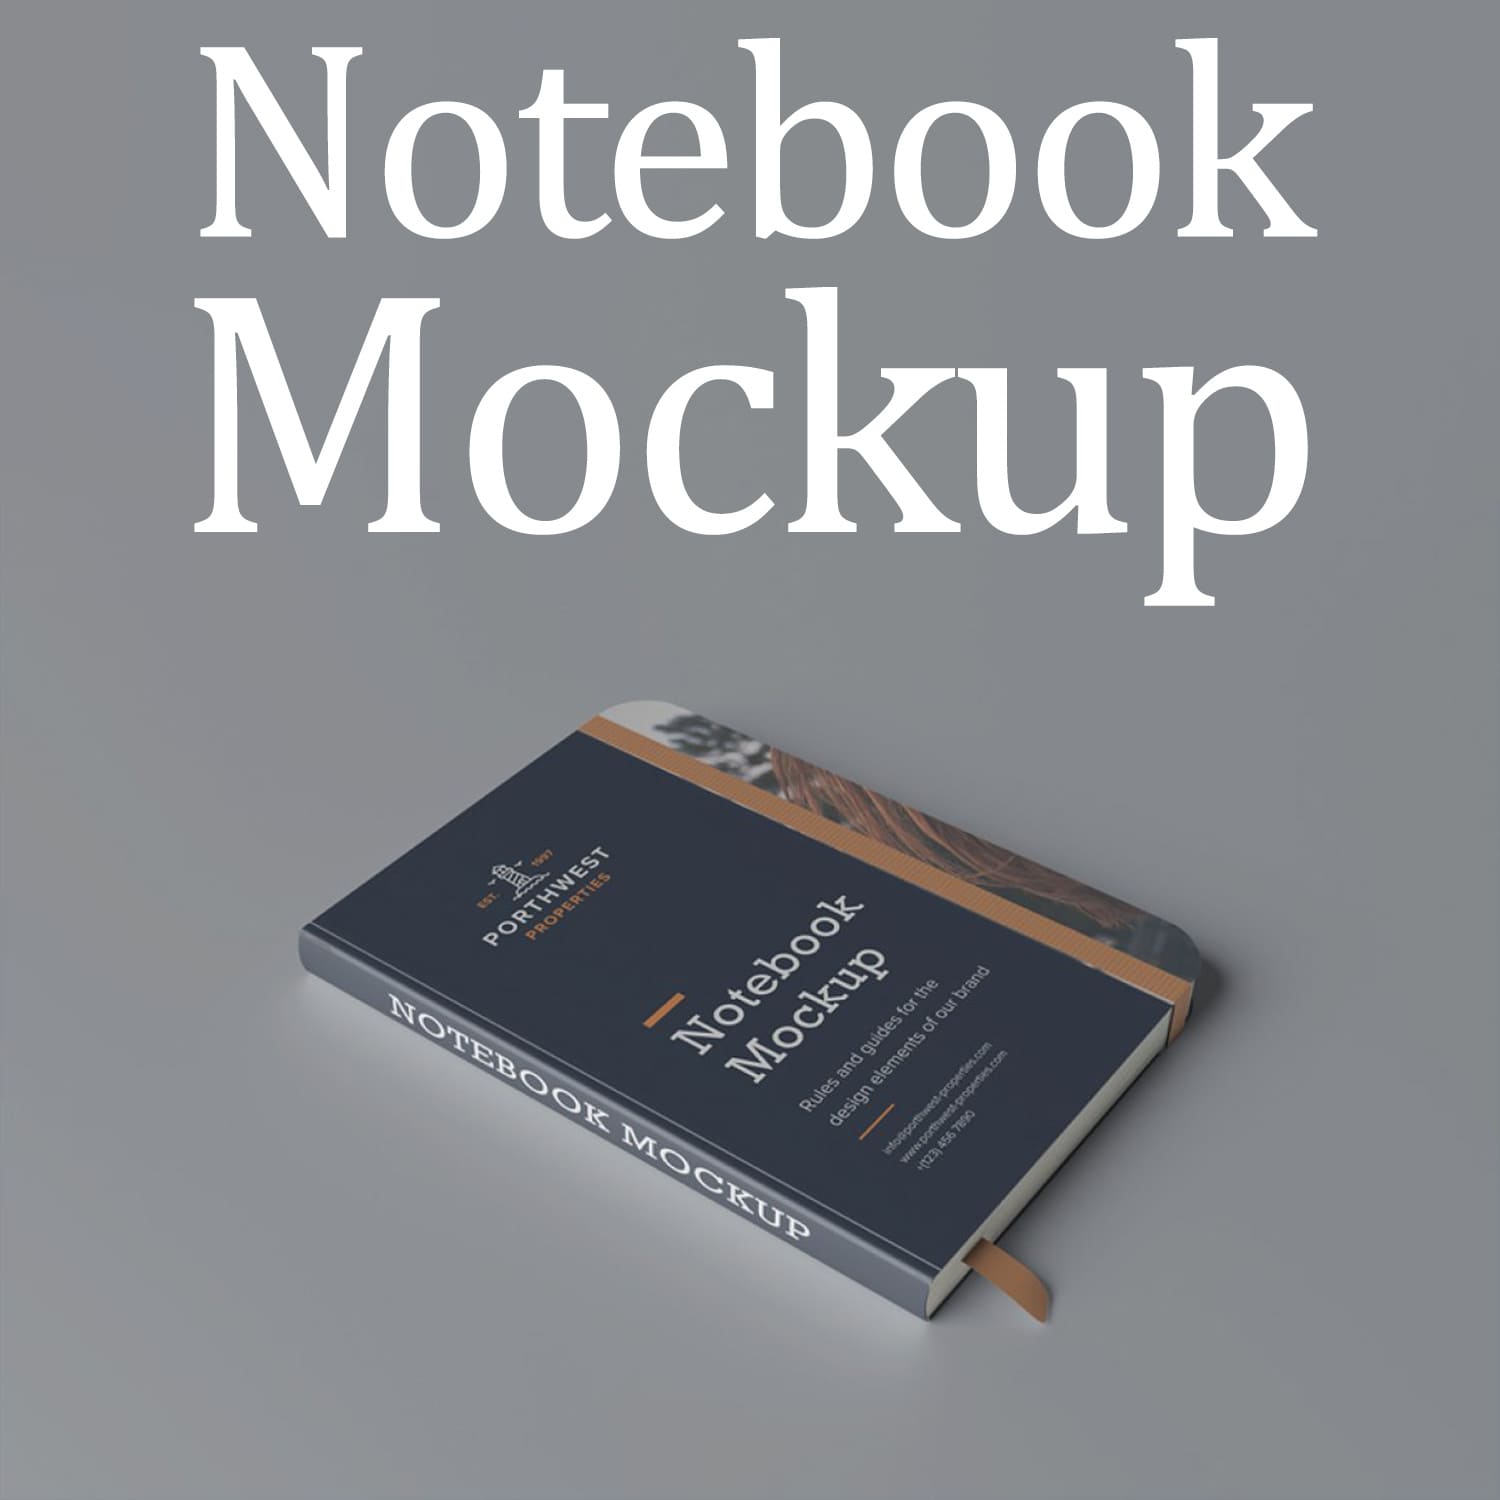 Image of a notepad with an irresistible design.